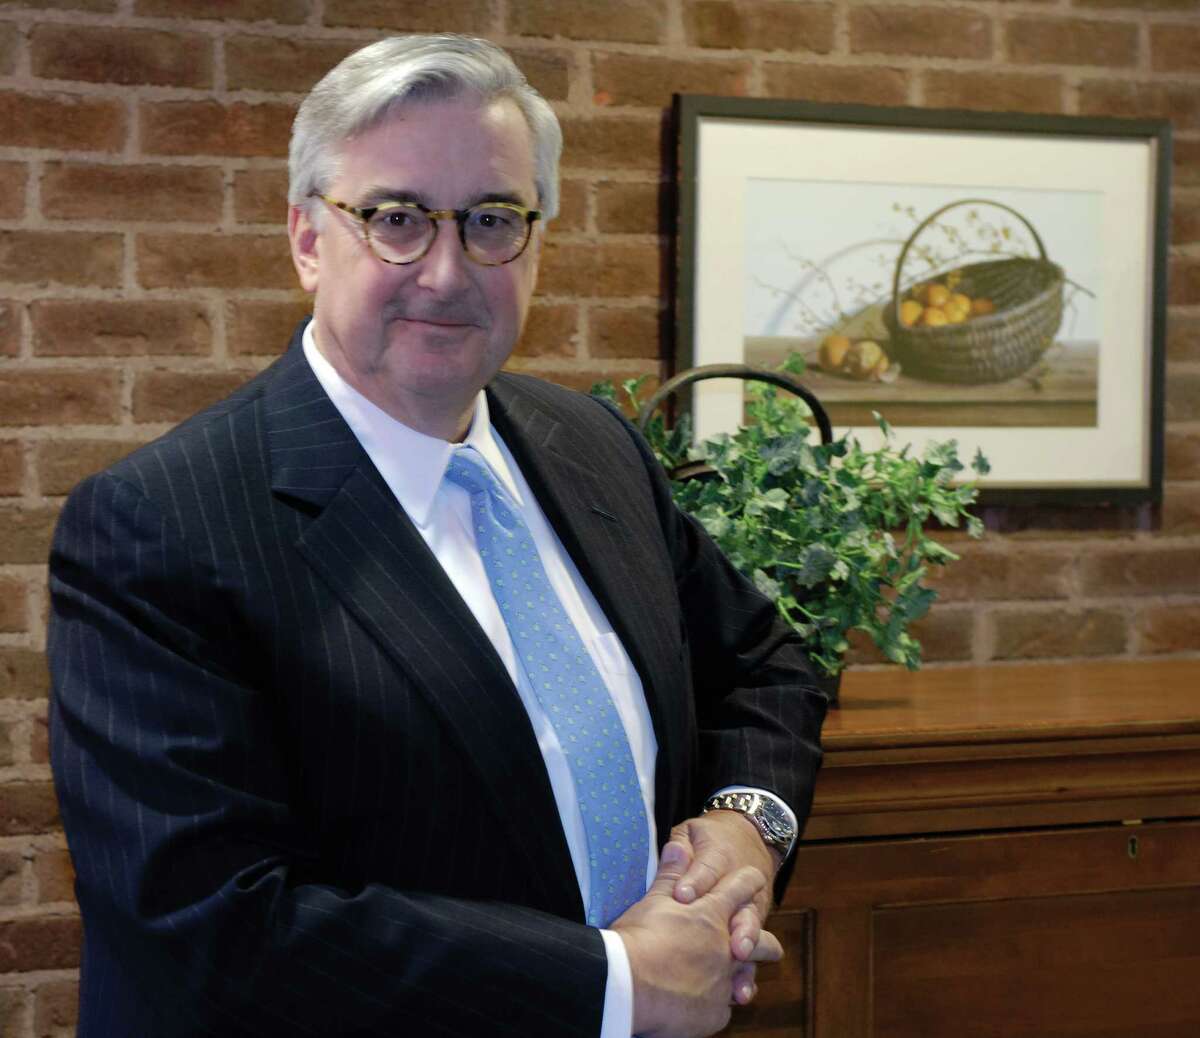 Tom Lewis, of New Canaan, has been elected chairman of the board of directors for Waveny LifeCare Network.